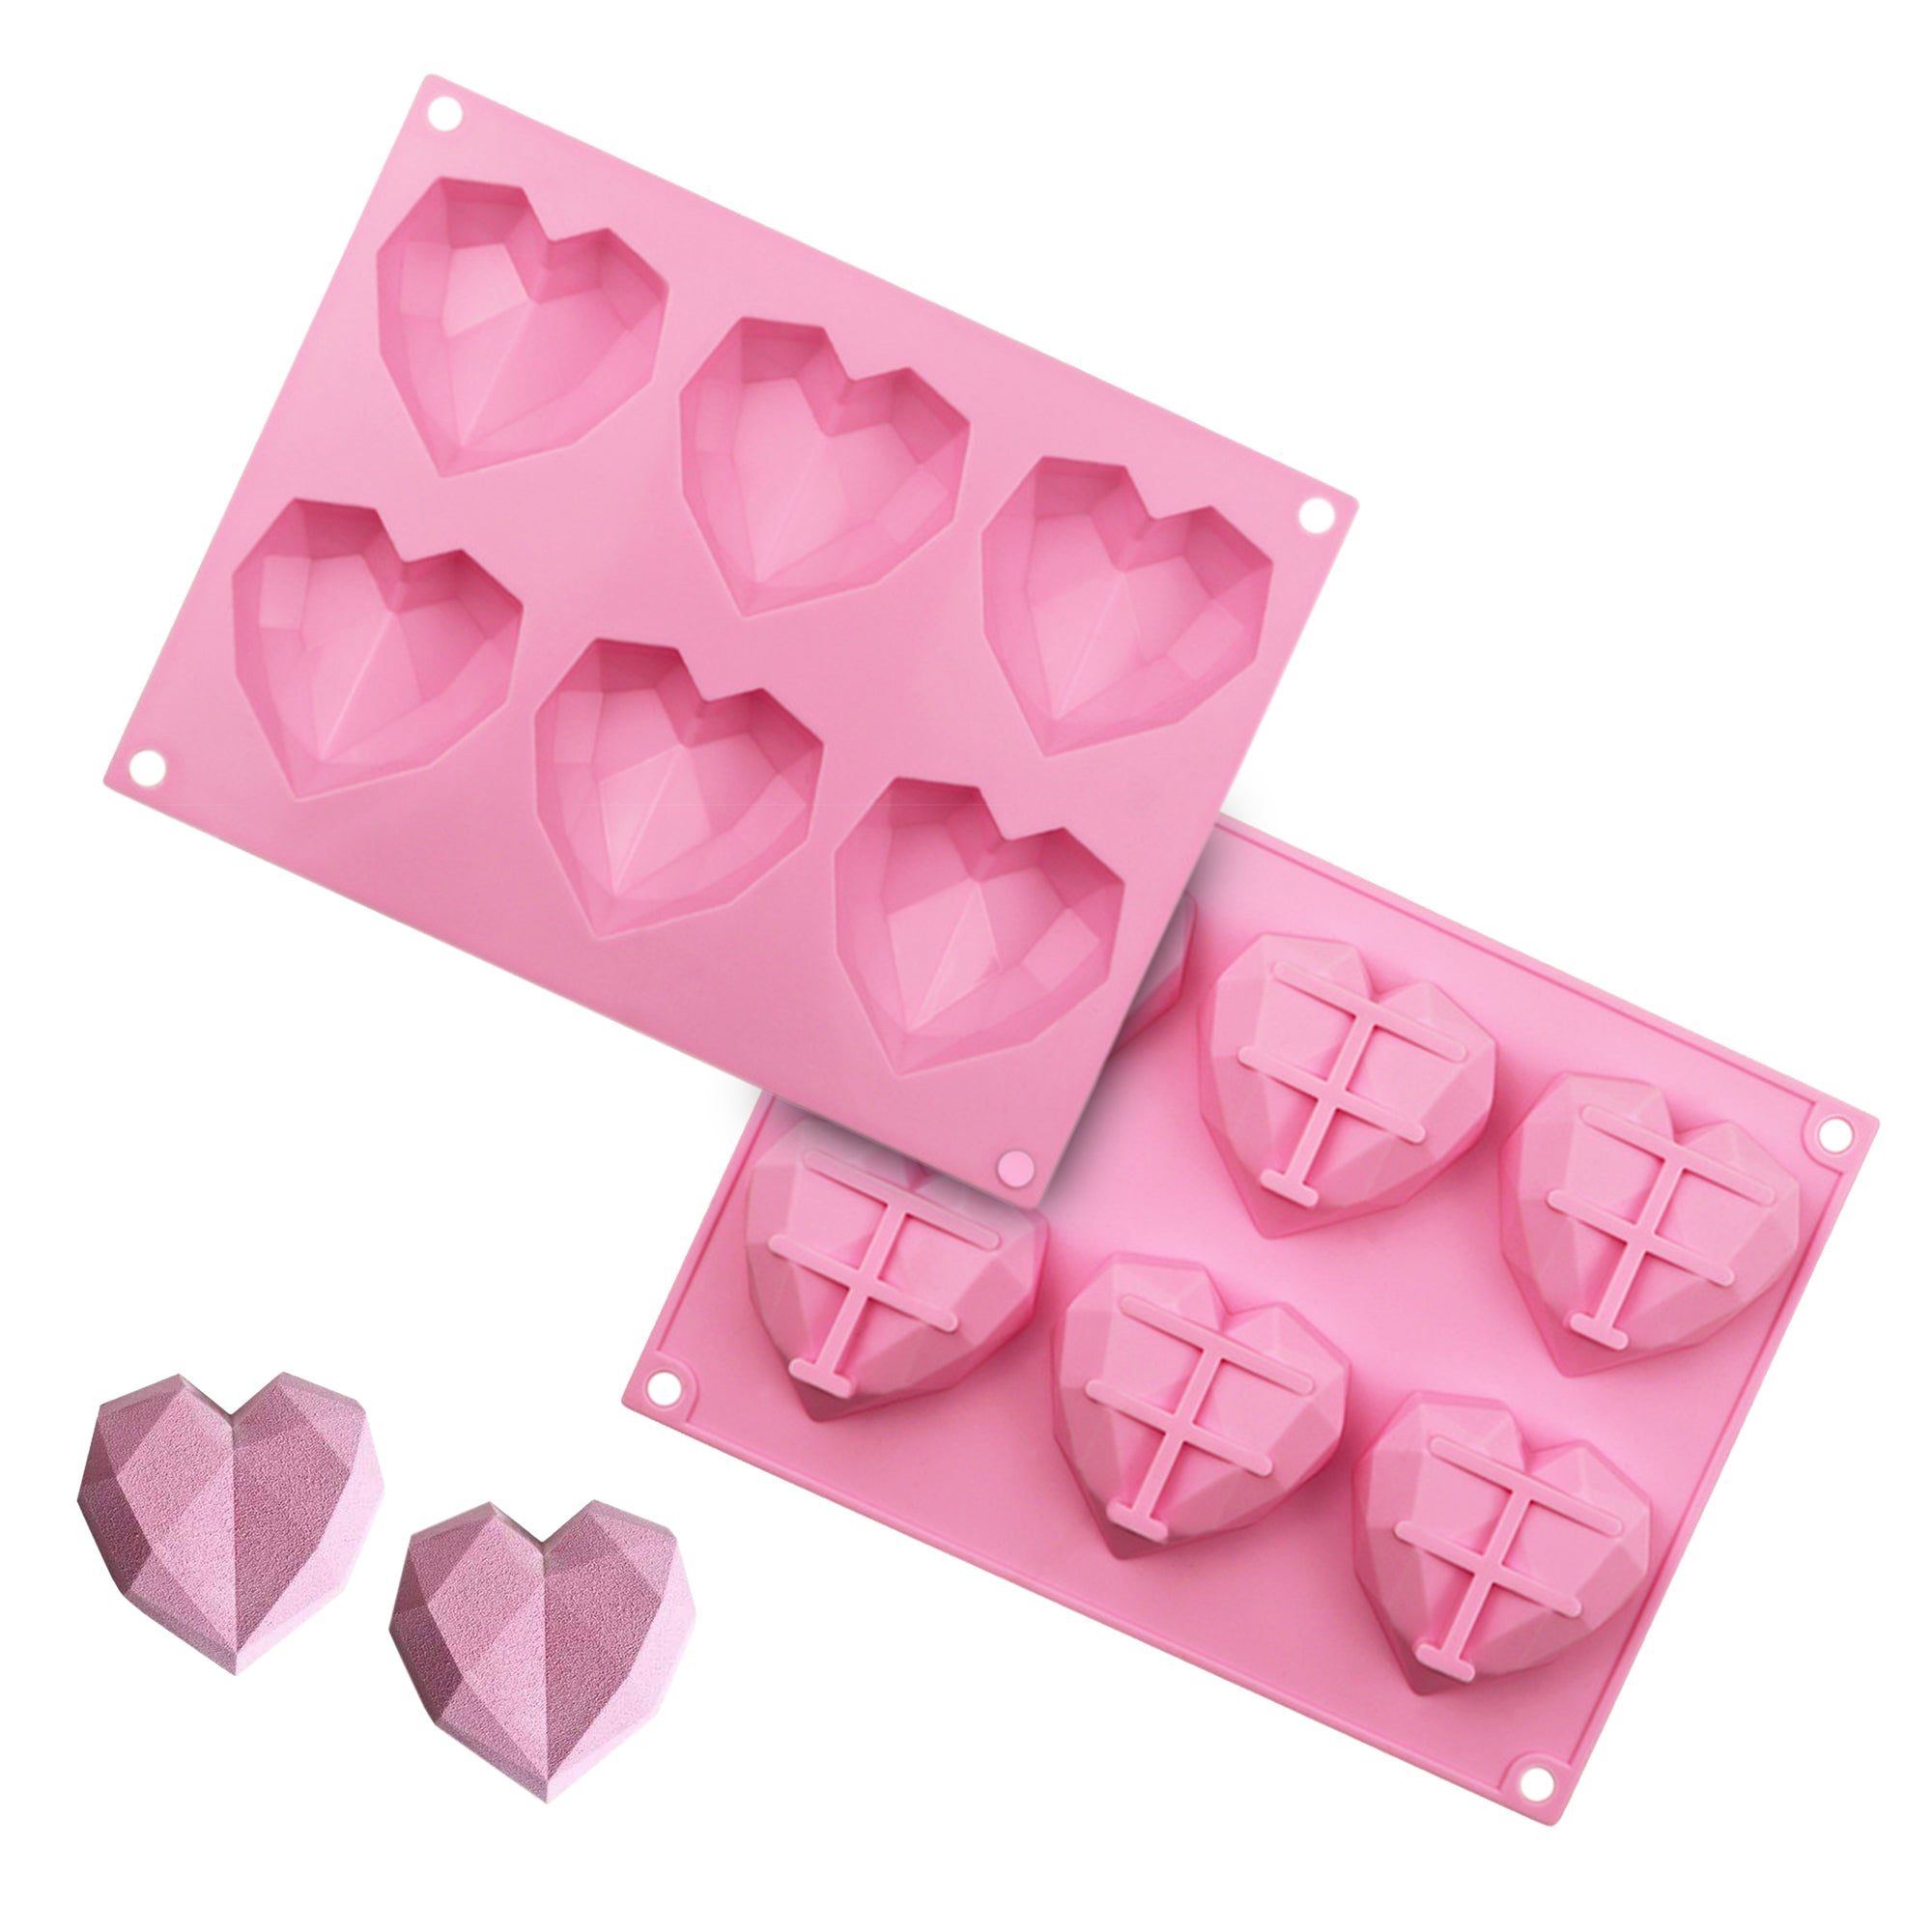 3D Geometric Heart Mold for Hot Cocoa Bombs